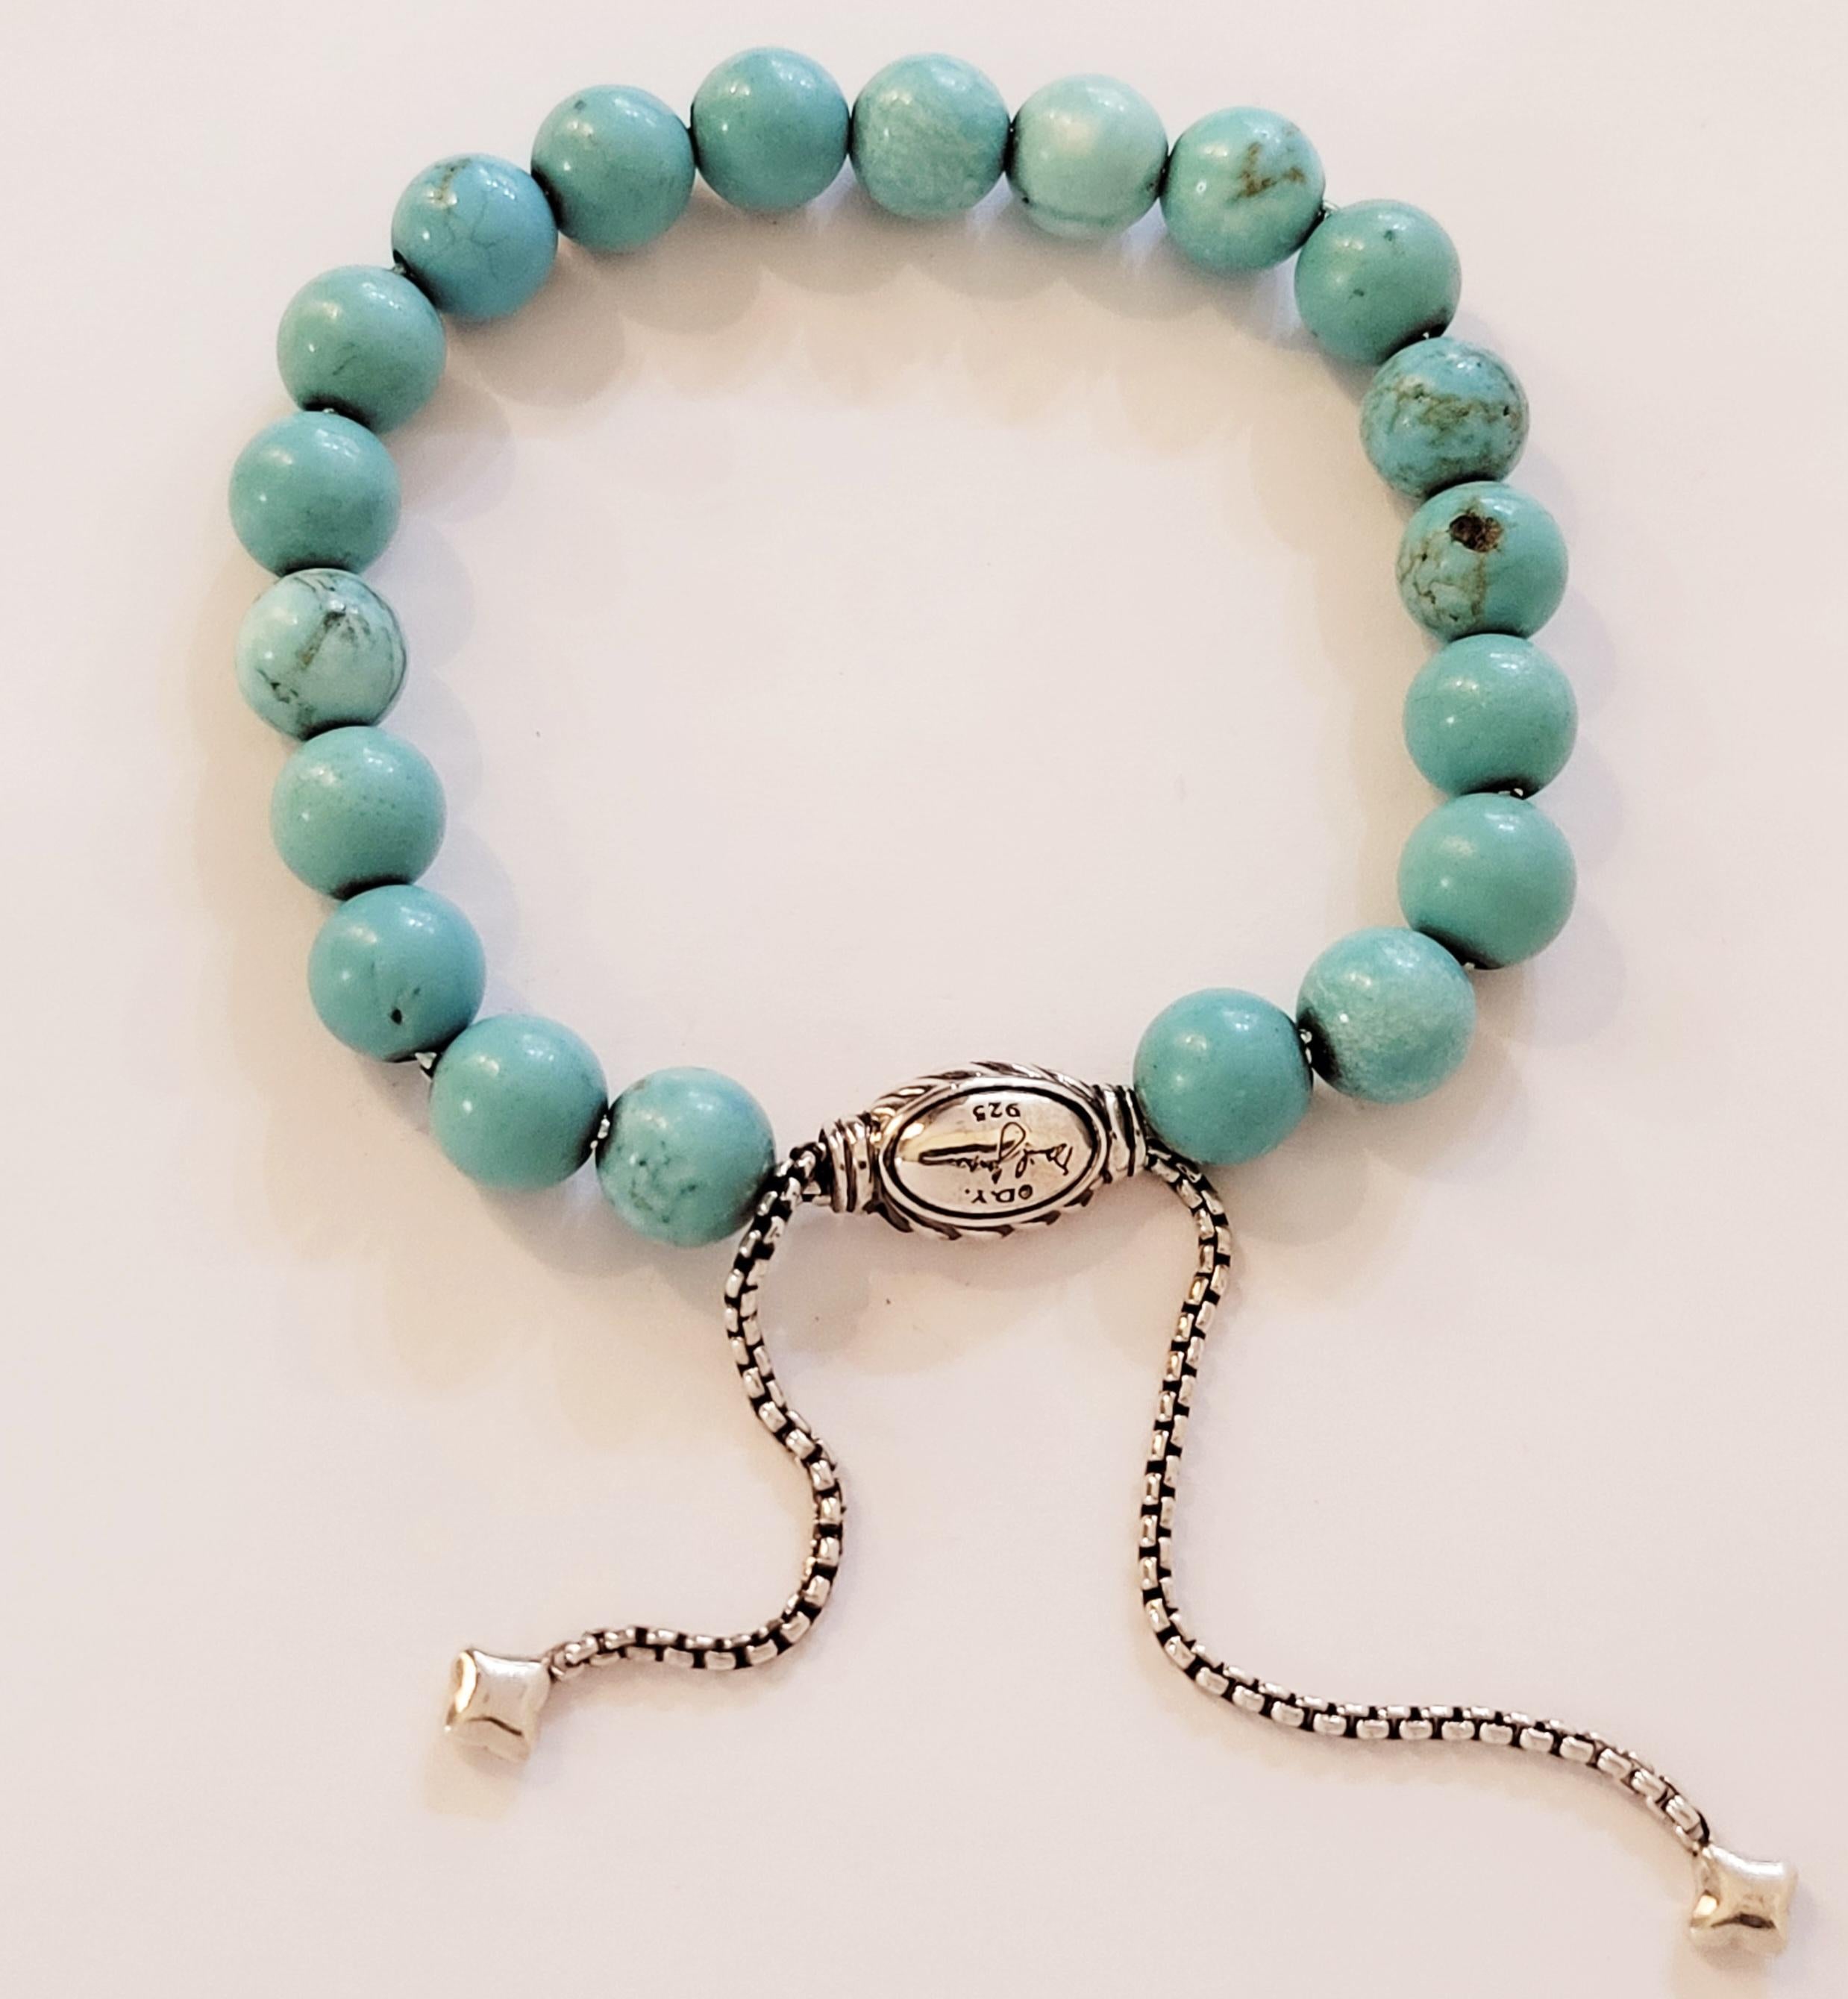 David Yurman Spiritual Bead turquoise bracelet 8mm In New Condition For Sale In New York, NY